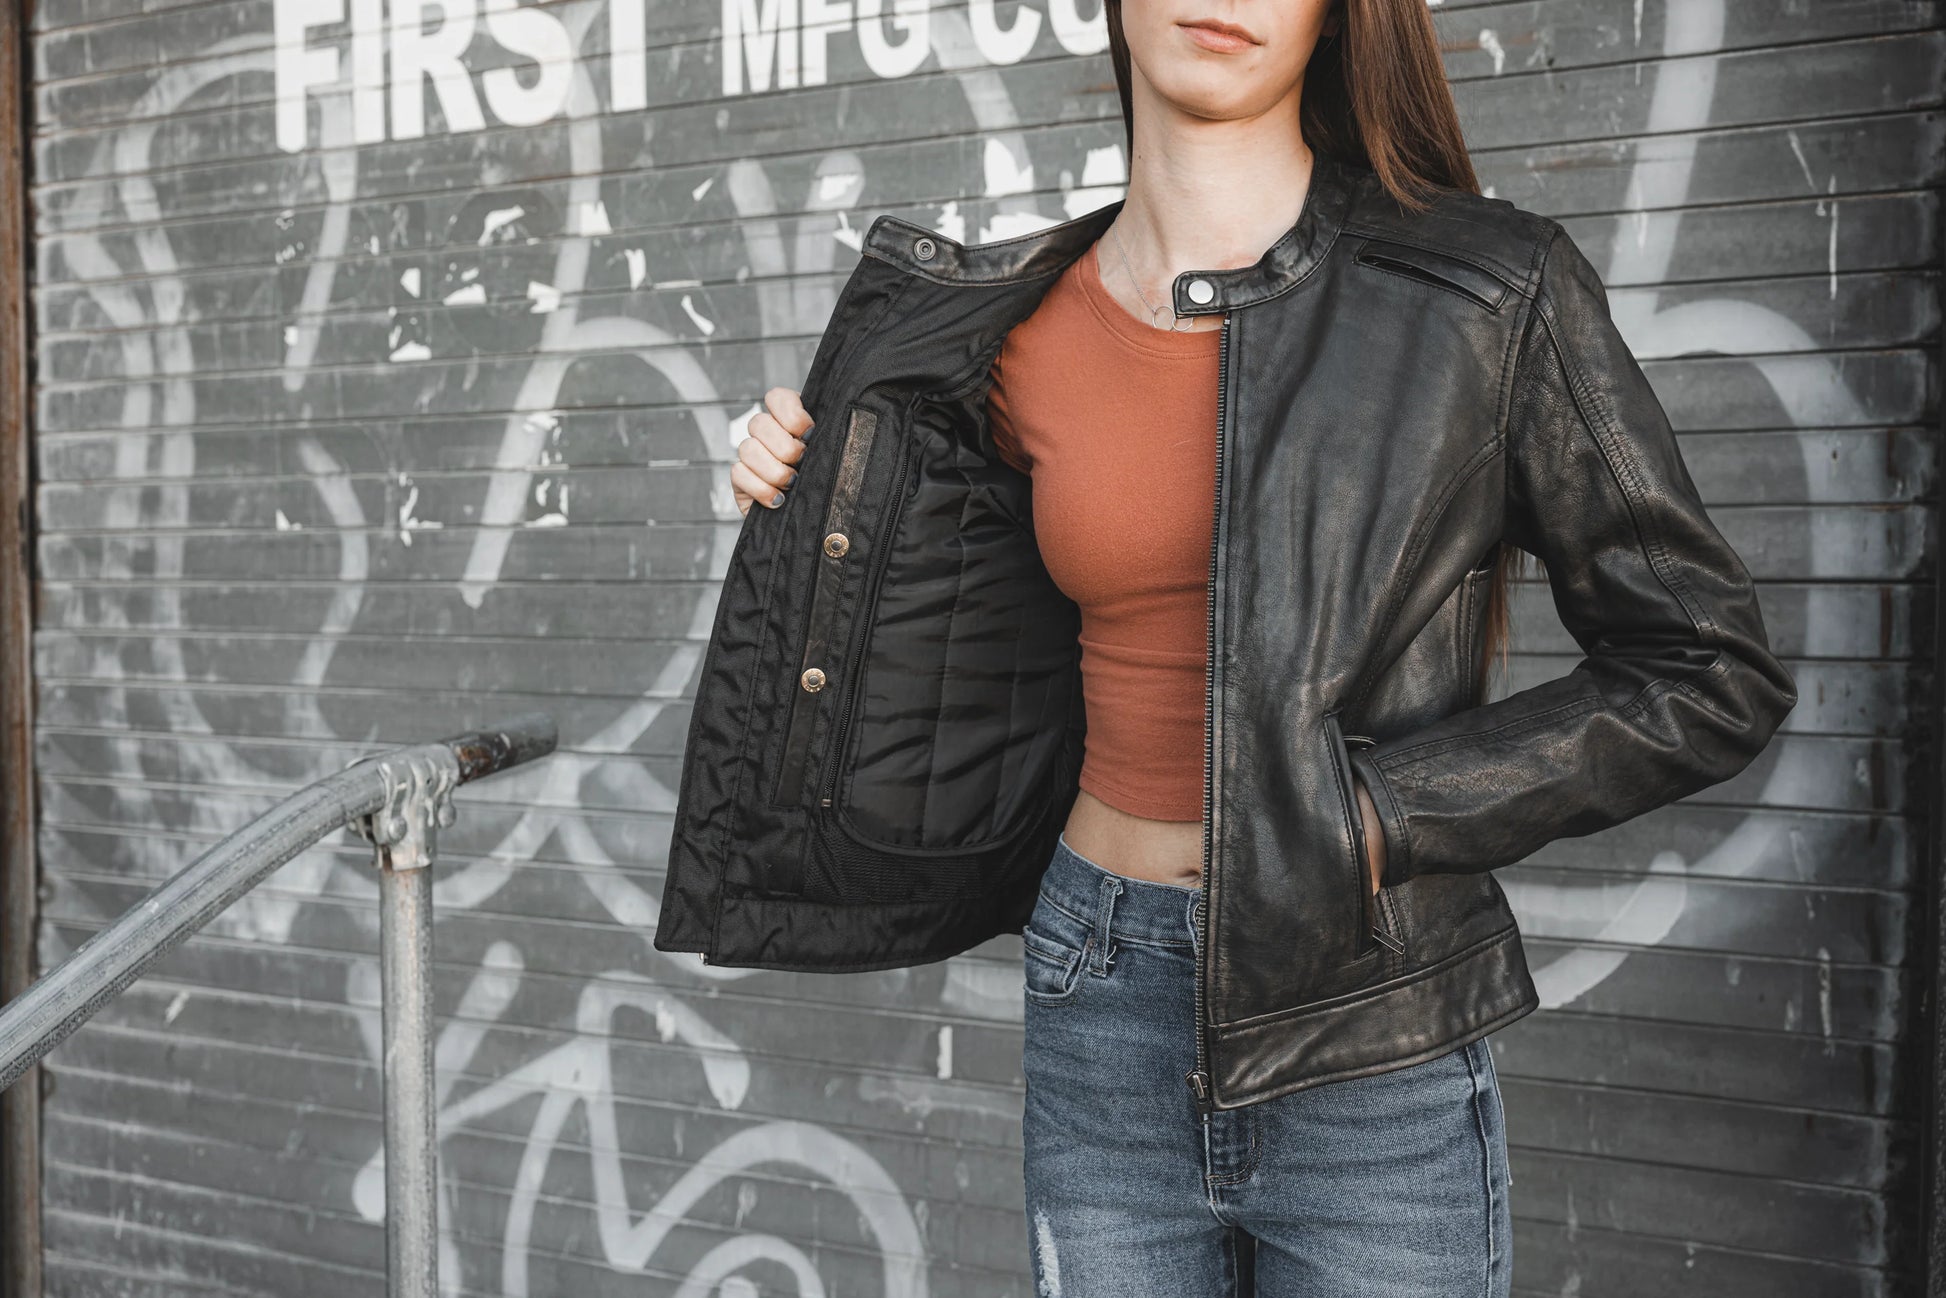 Trickster Motorcycle Jacket: Woman Wearing, Open, Vents, Conceal Carry. Stylish Leather